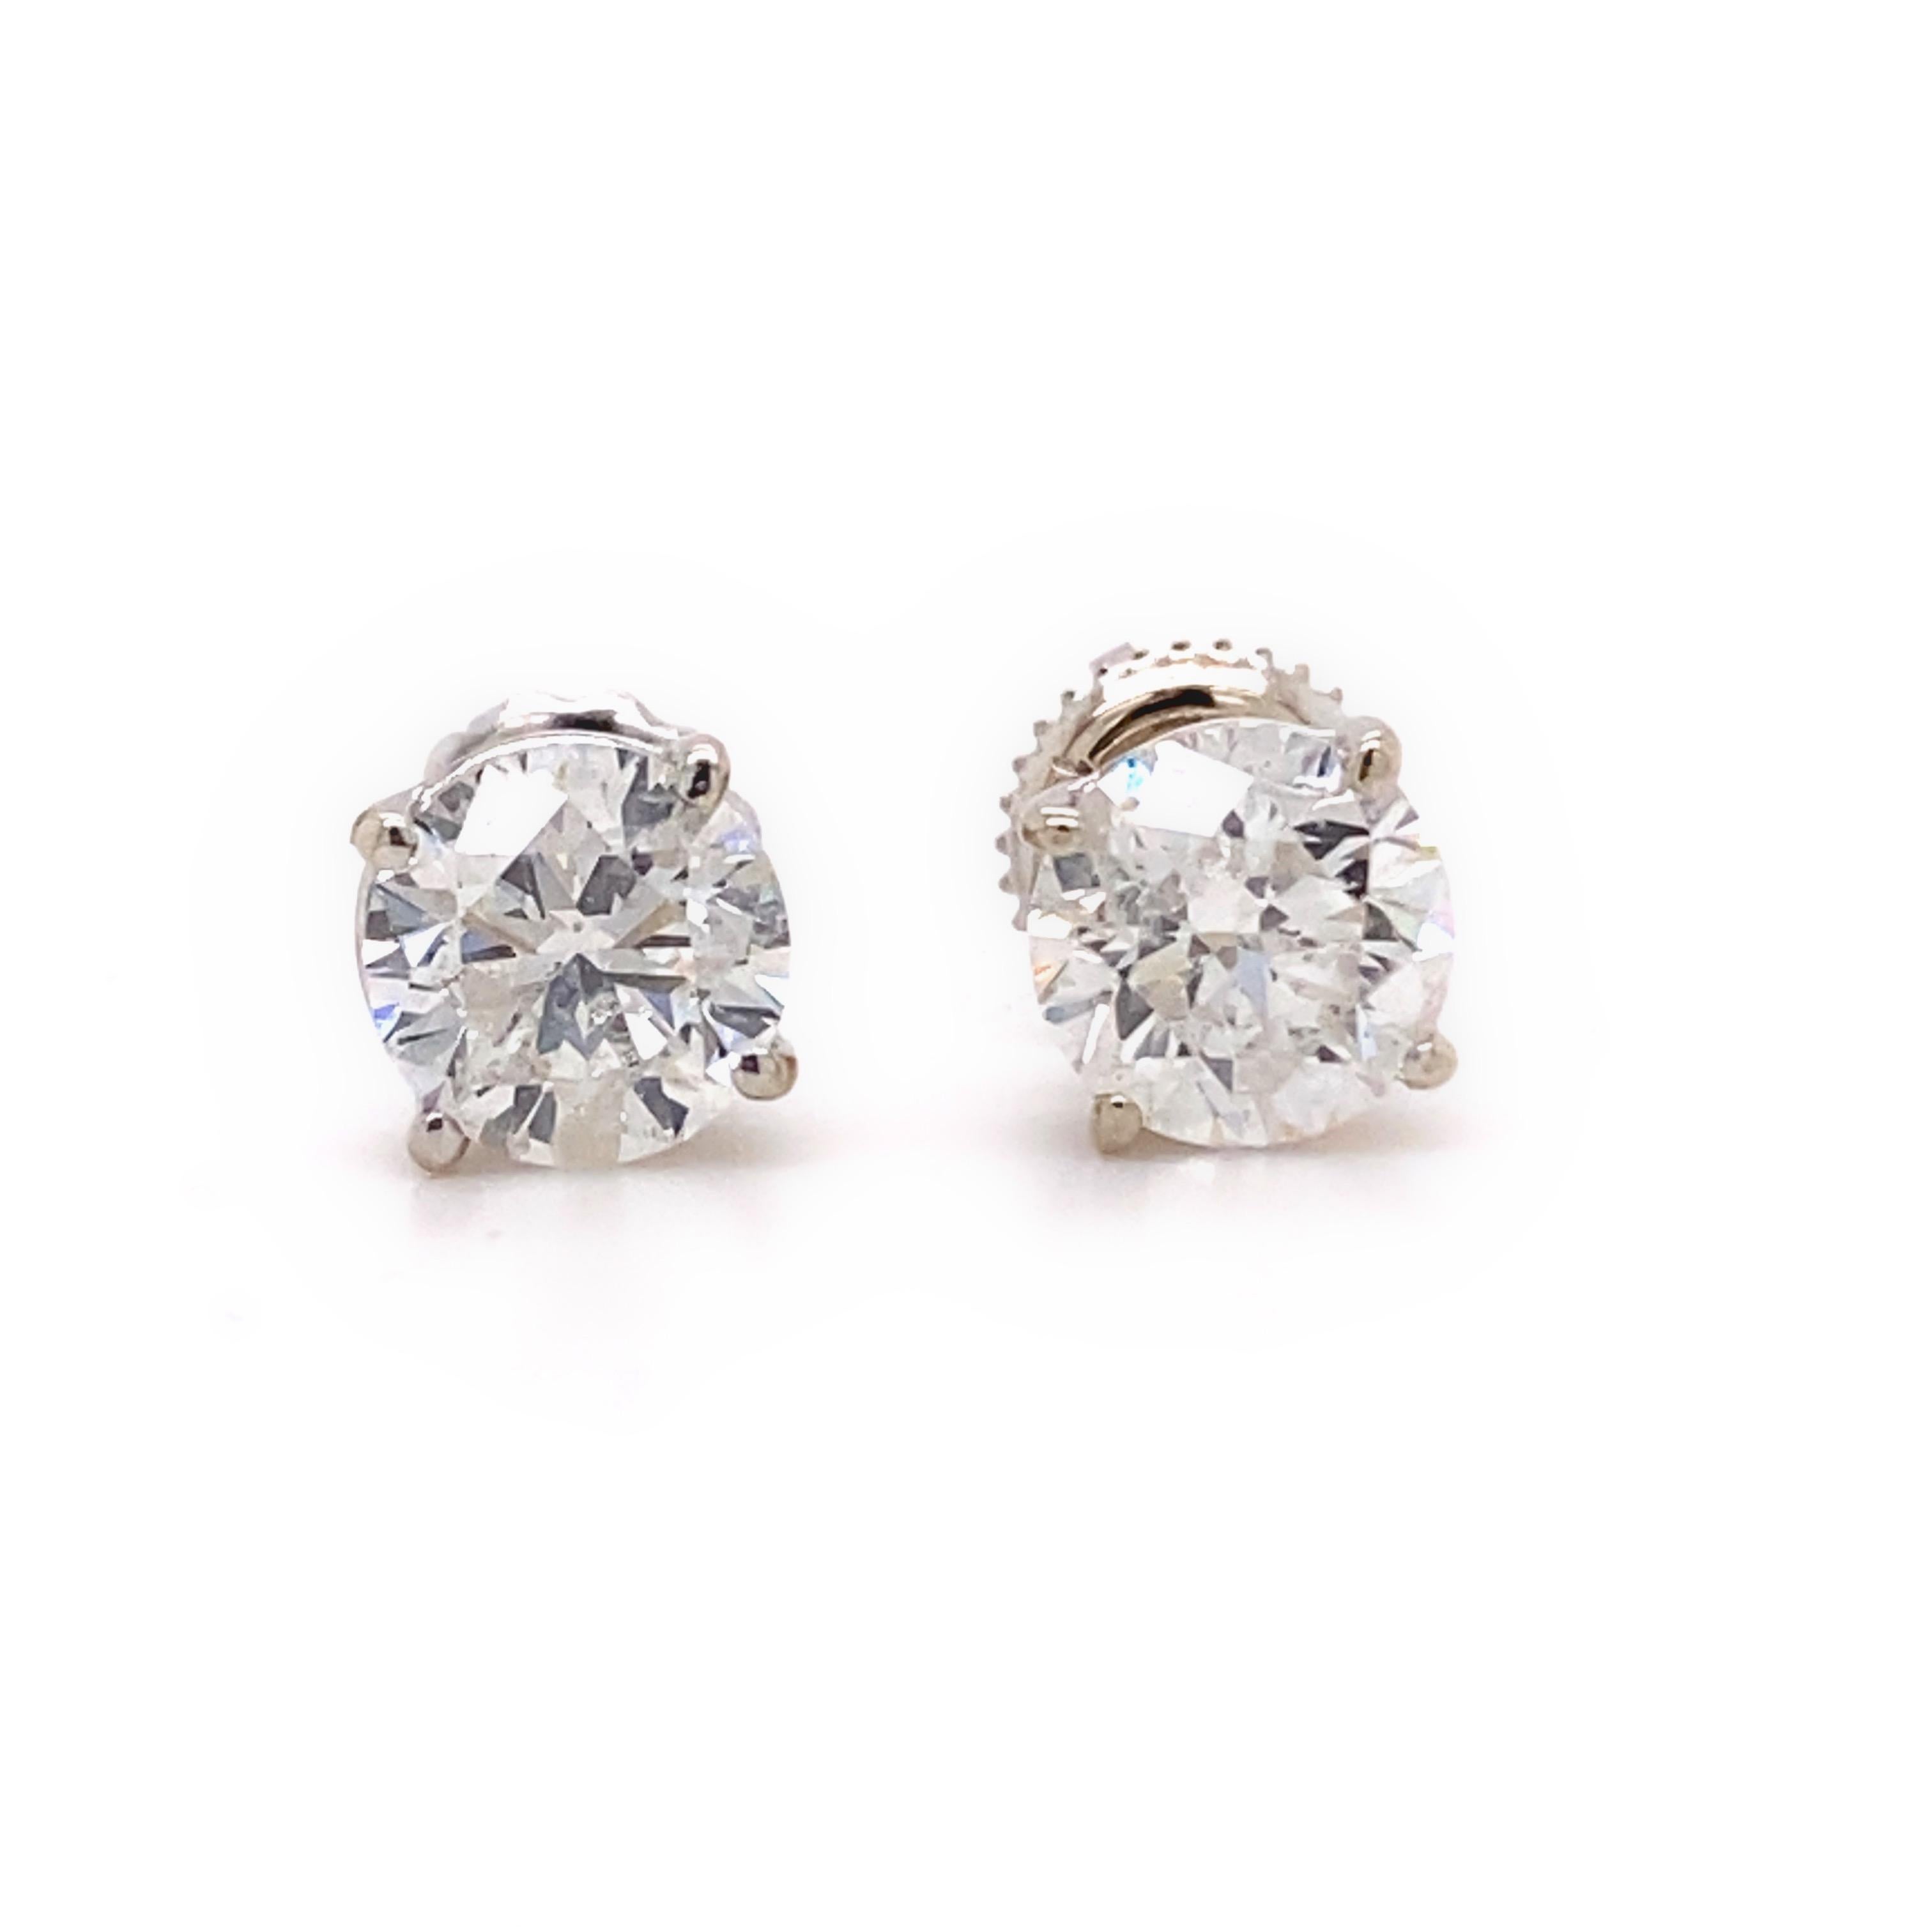 Women's or Men's Round Solitaire Diamond Stud Earrings 1.82 Tcw Set in 14kt White Gold For Sale